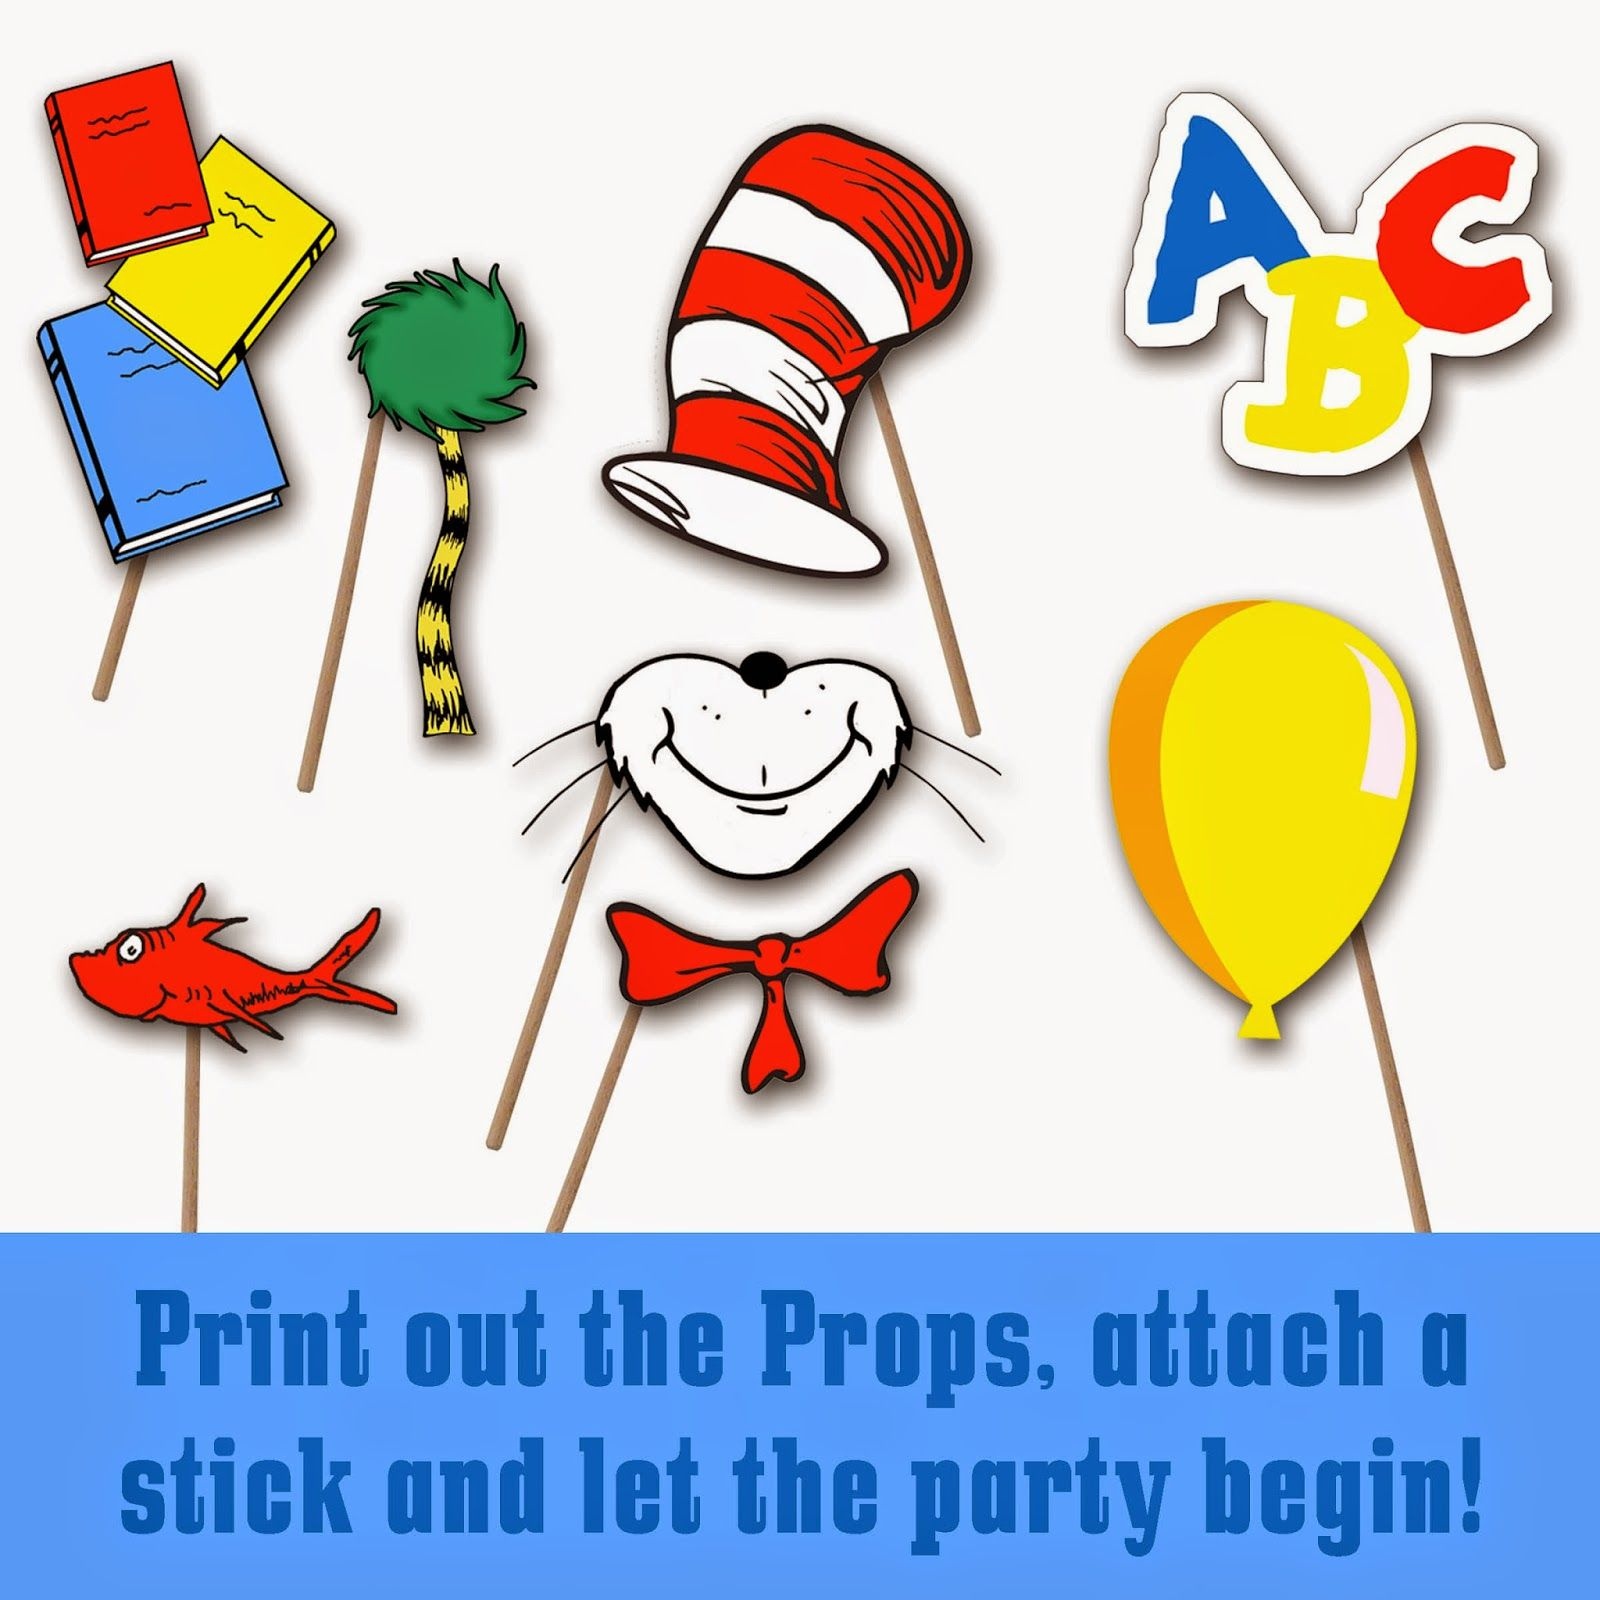 Dr. Seuss Photo Booth Printable Props | School-Dr. Seuss - Free Printable Dr Seuss Photo Props